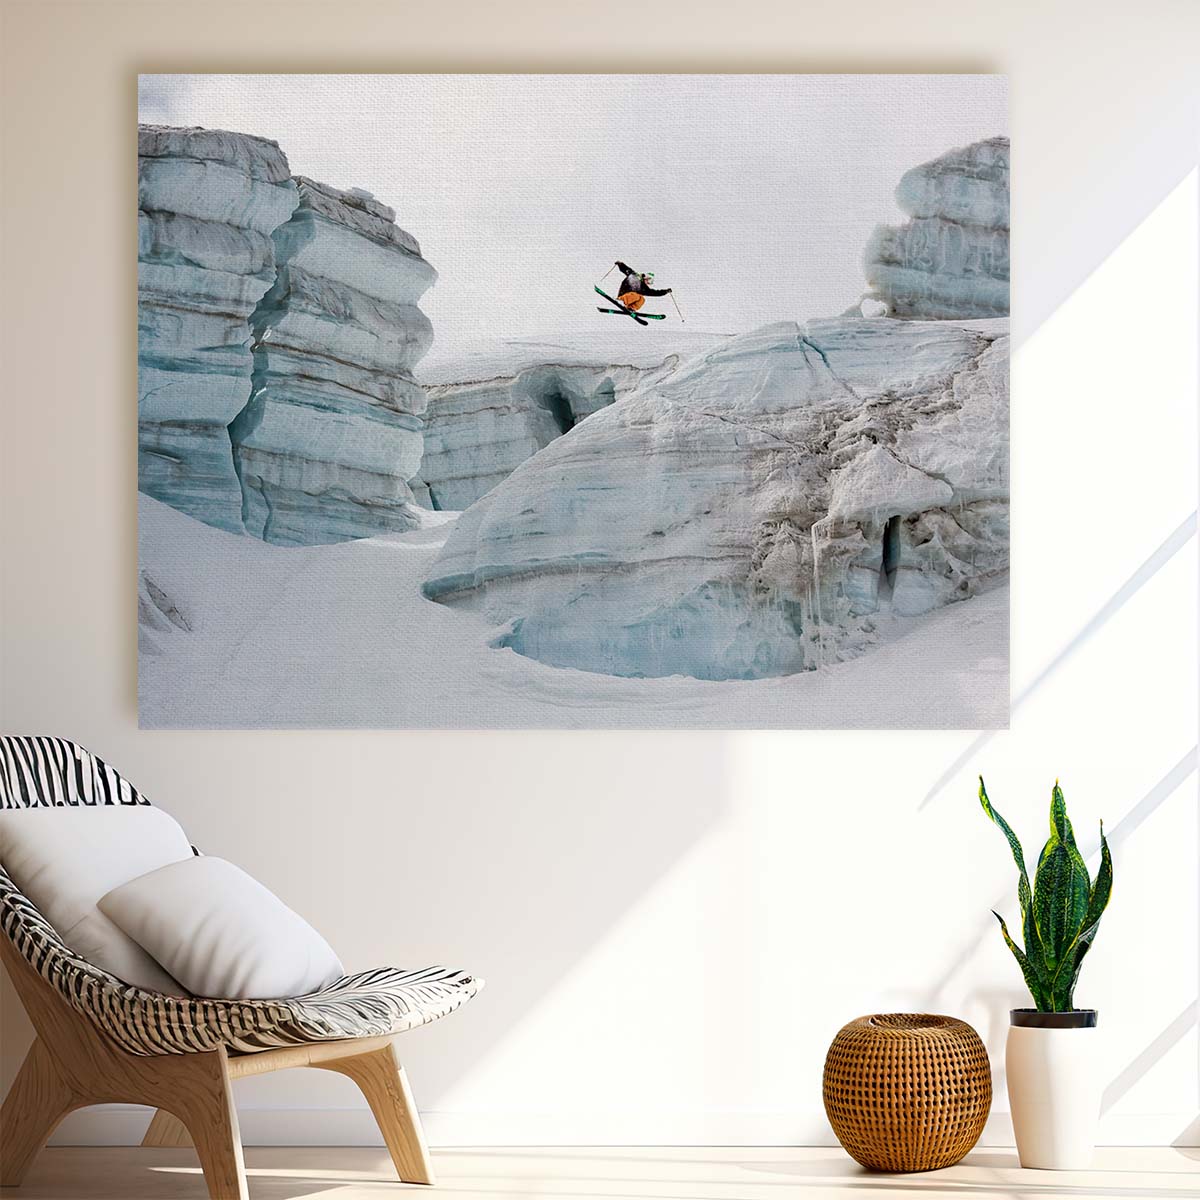 Extreme Freeski Action in Chamonix Alps Wall Art by Luxuriance Designs. Made in USA.